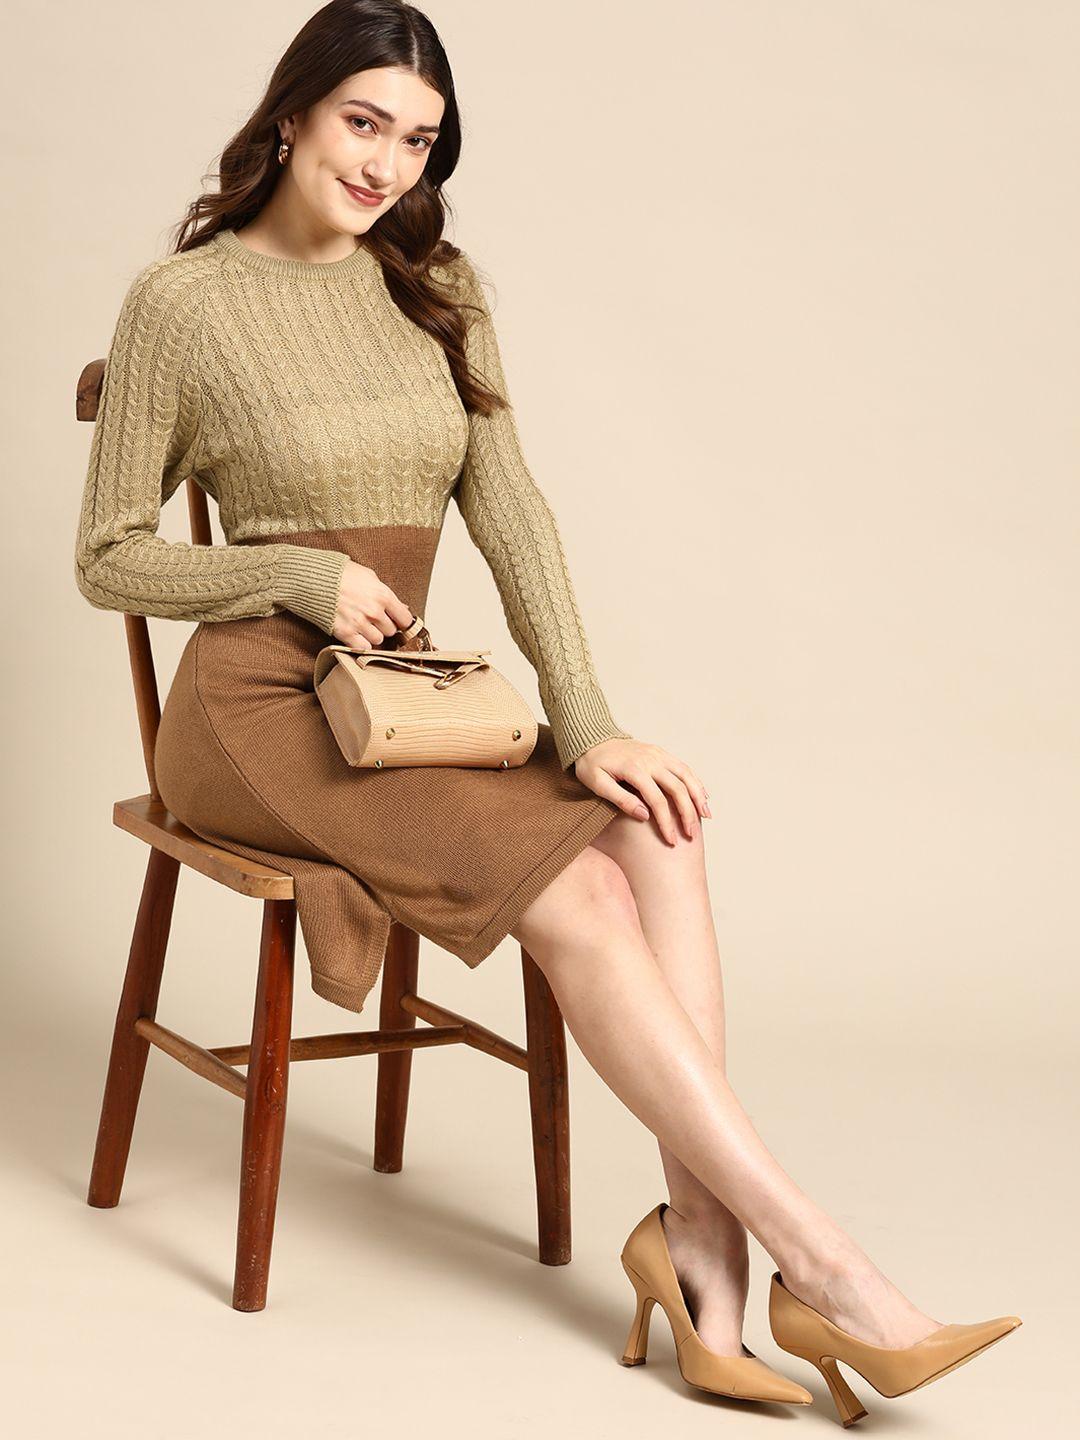 all about you beige & brown cable knit acrylic colourblocked sheath dress